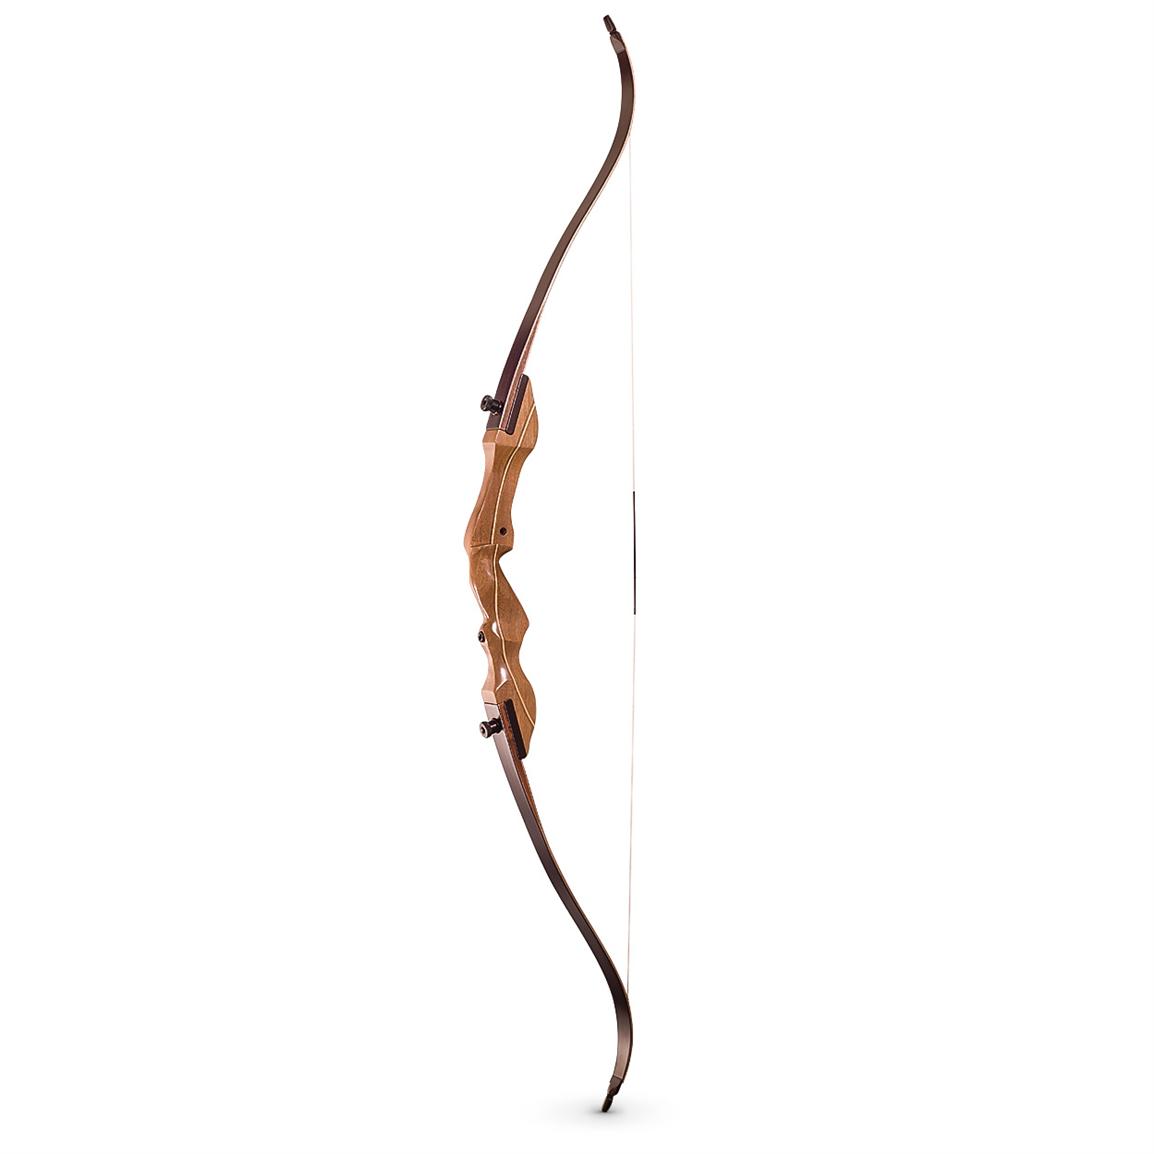 What S The Best Recurve Bow For Hunting The Best And Most Complete